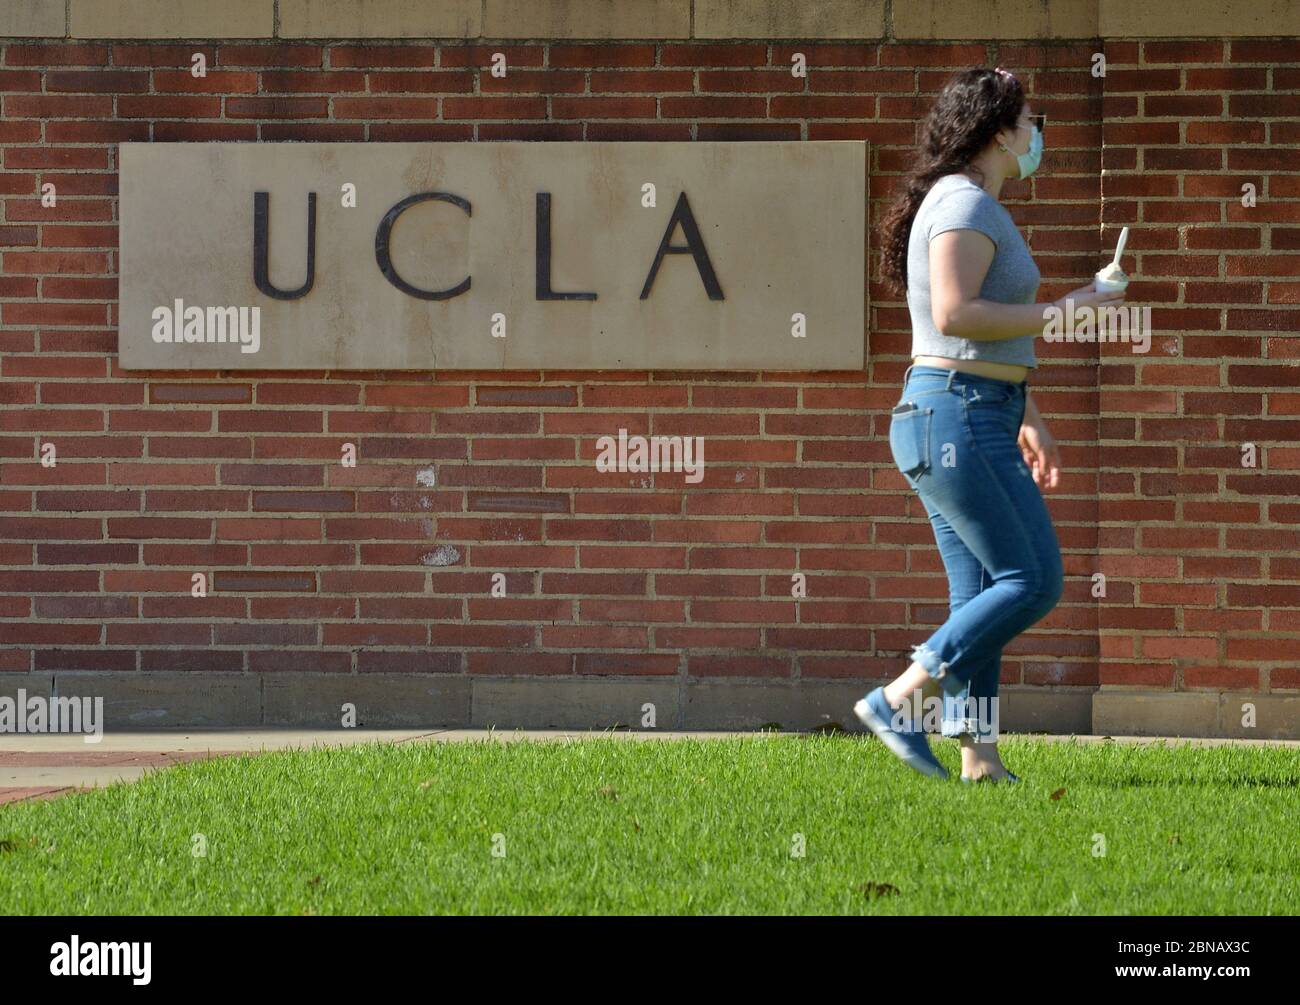 A student walks near the entrance of the UCLA campus in Los Angeles on Wednesday, May 13, 2020. California State University, the nation's largest four-year college system, plans to cancel most in-person classes in the fall and instead offer instruction primarily online, Chancellor Timothy White announced Tuesday. The vast majority of classes across the 23-campus Cal State system will be taught online, White said, with some limited exceptions that allow for in-person activity. 'Our university, when open without restrictions and fully in person is a place where over 500,000 people come together Stock Photo